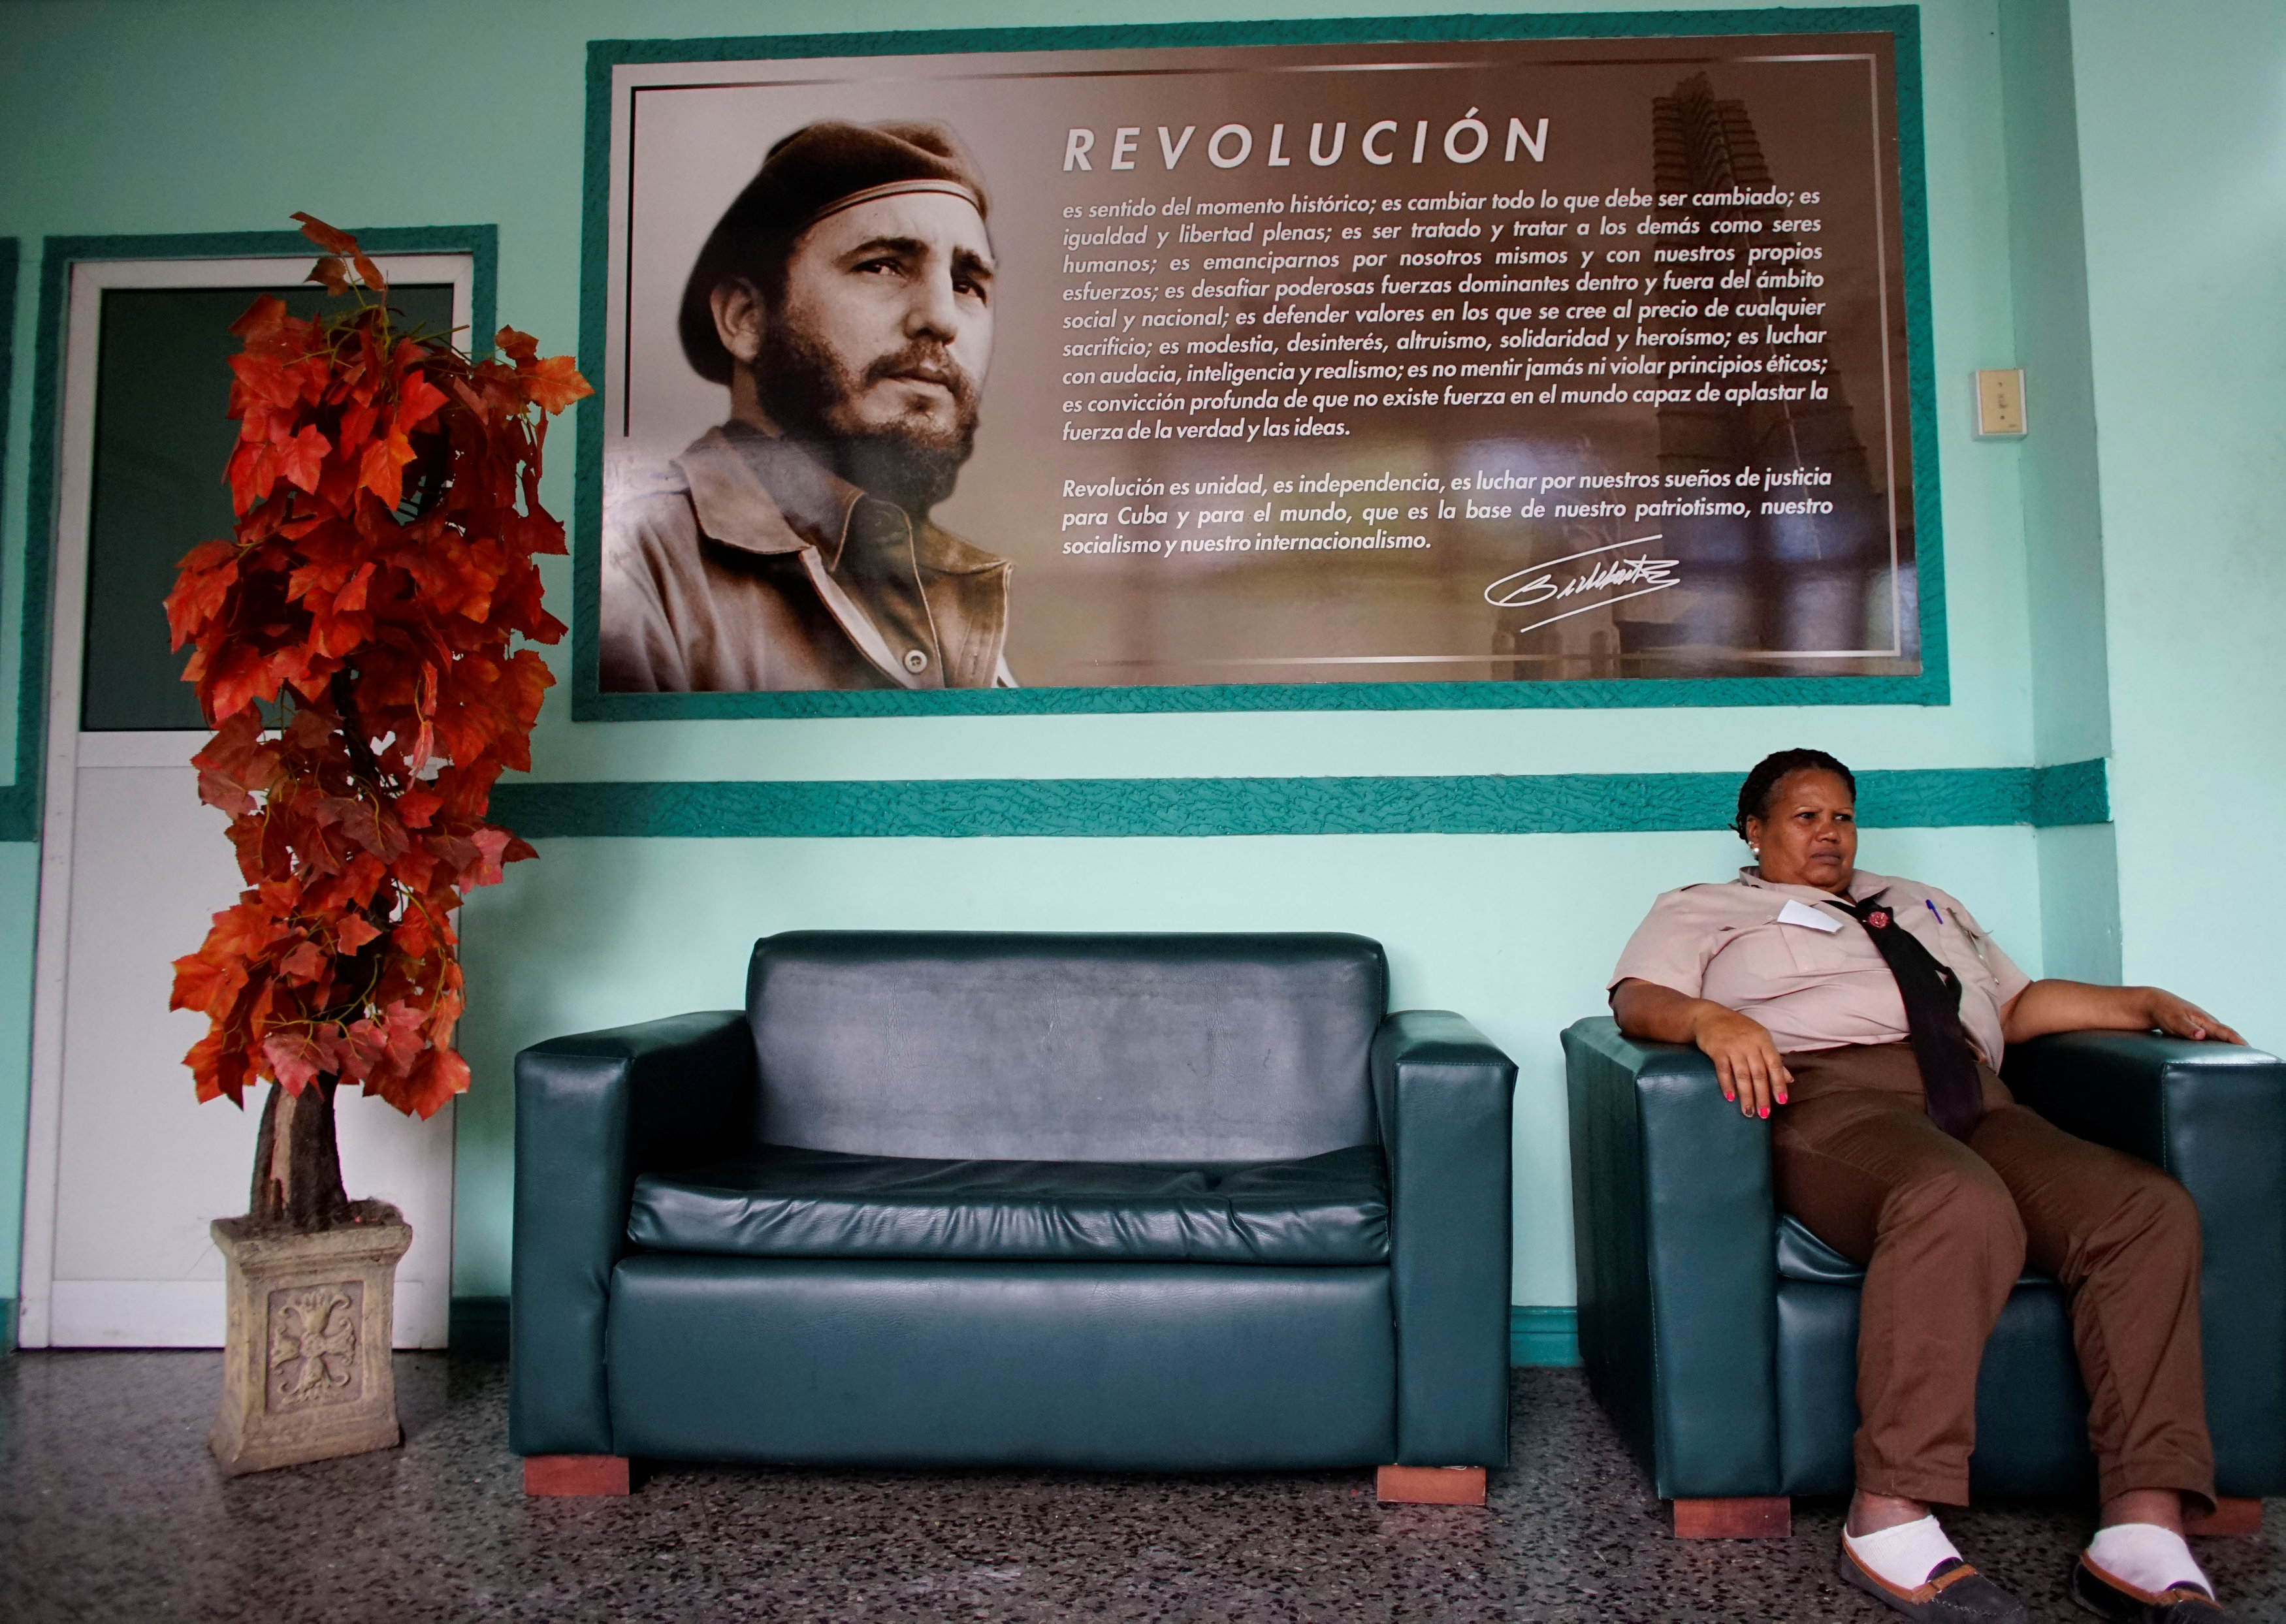 Cuba honours Fidel Castro one year after his death